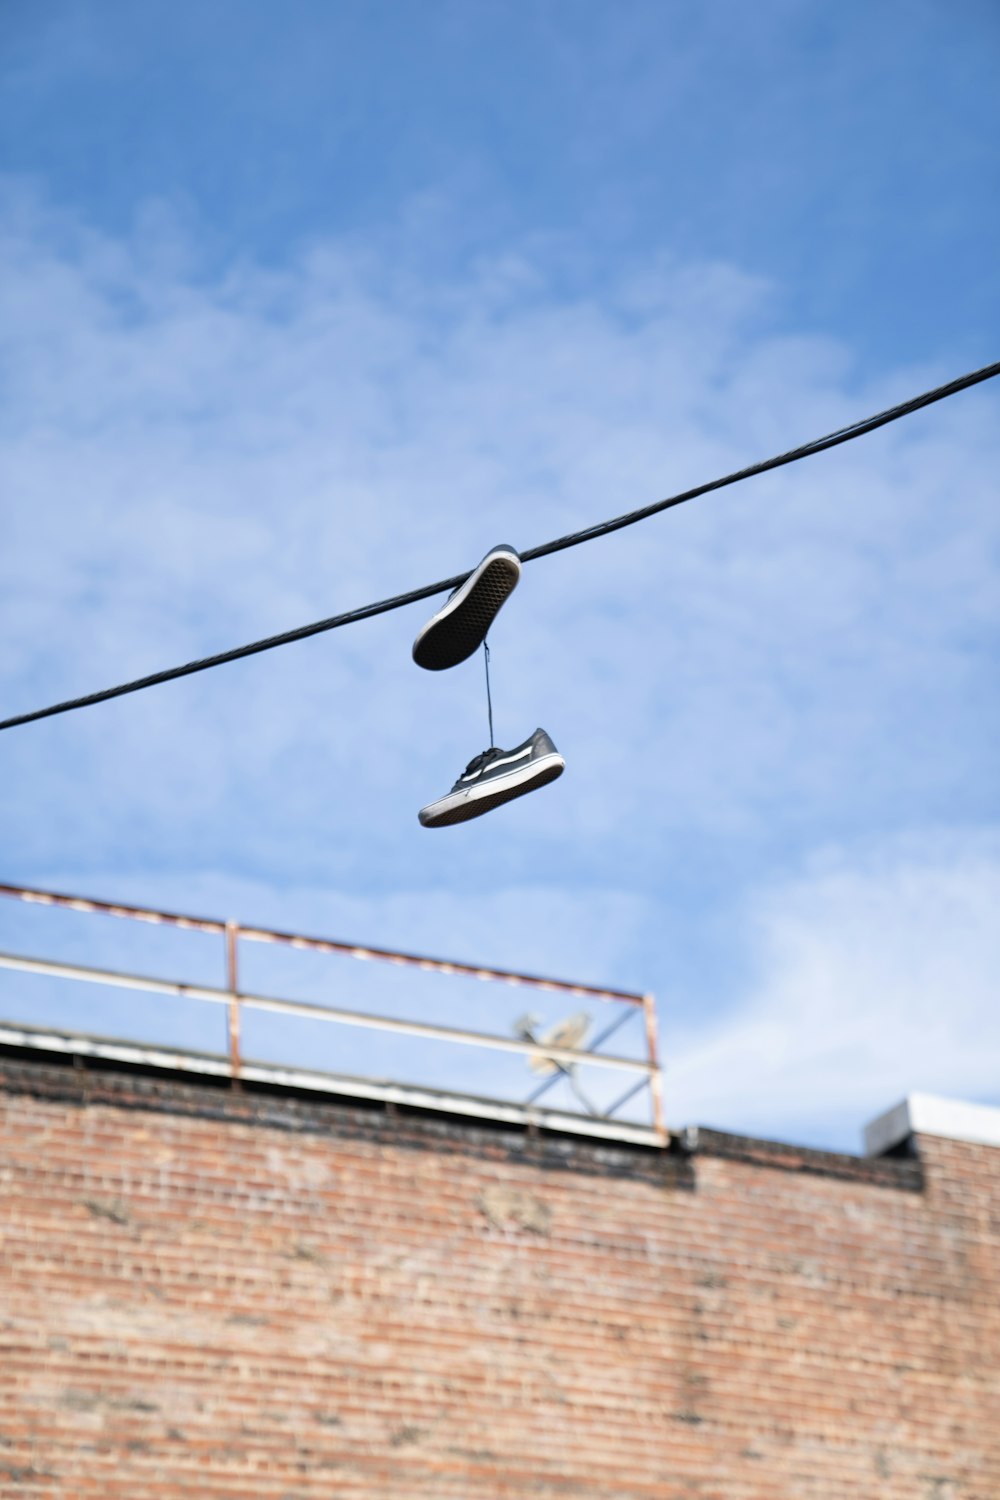 low-angle photography of shoes hanging on cable